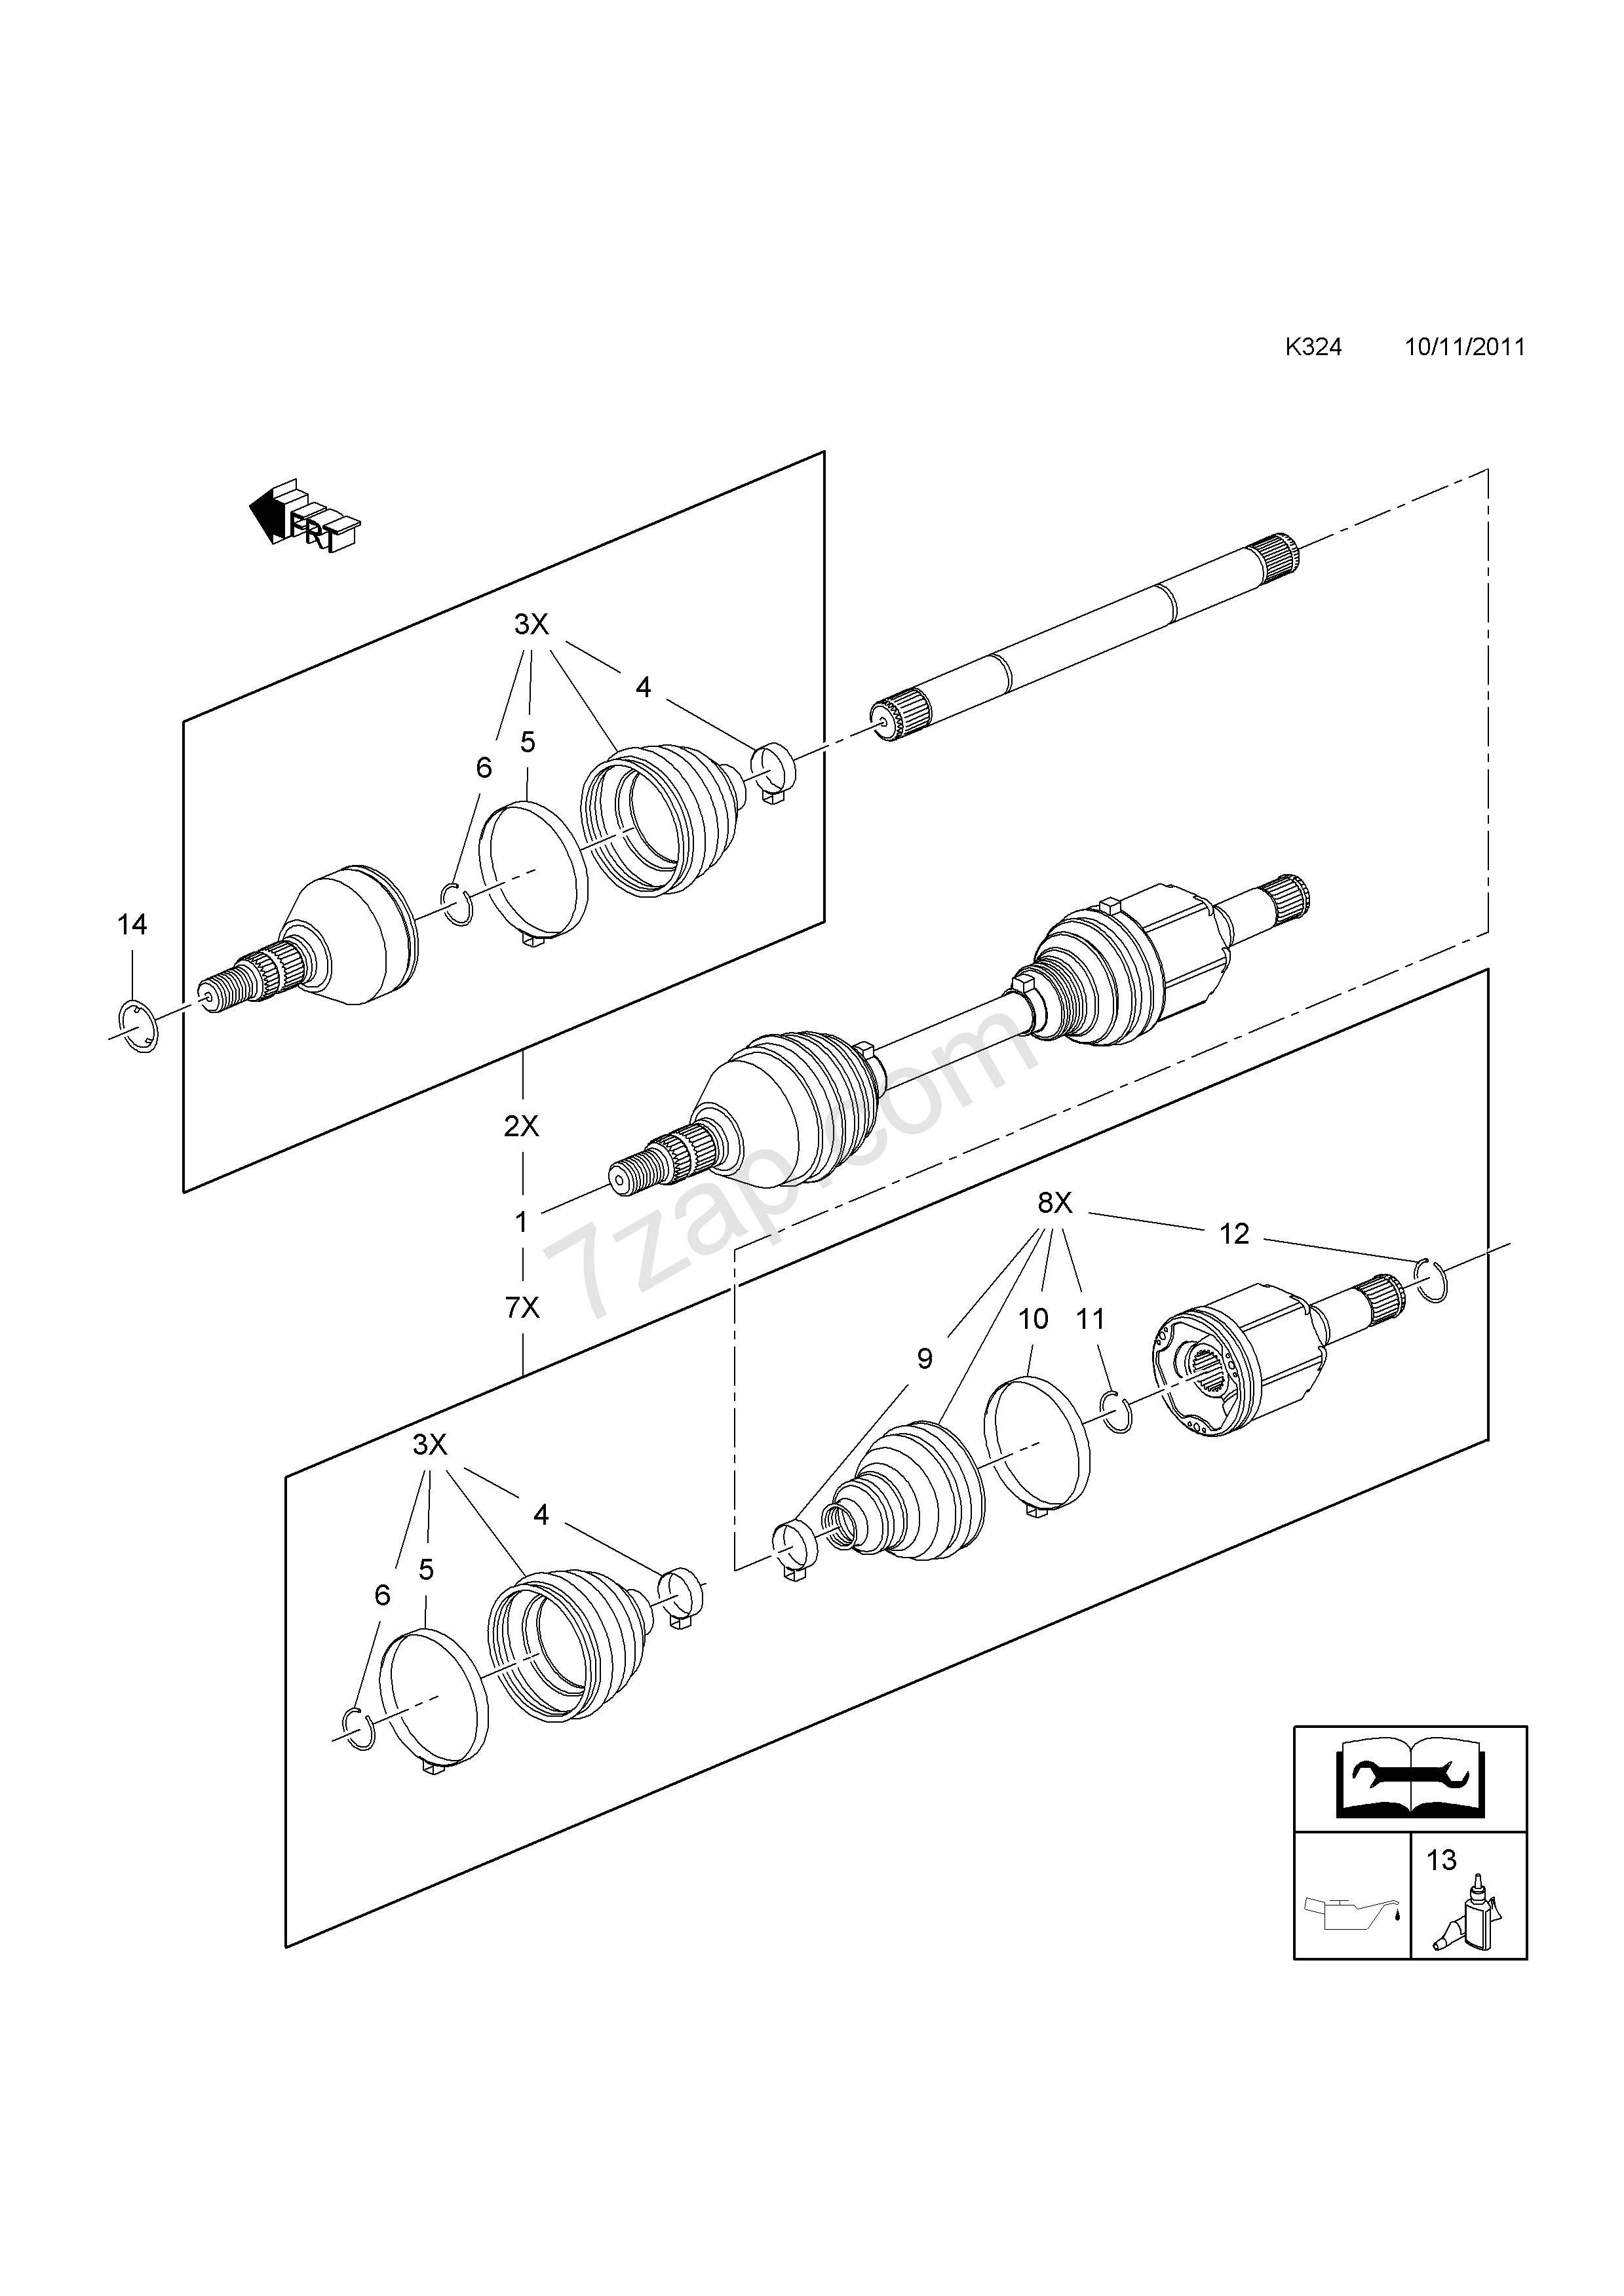 Front Wheel Drive Transmission Diagram Front Axle Drive Shaft [used with F40 Manual Transmission A28ner Of Front Wheel Drive Transmission Diagram